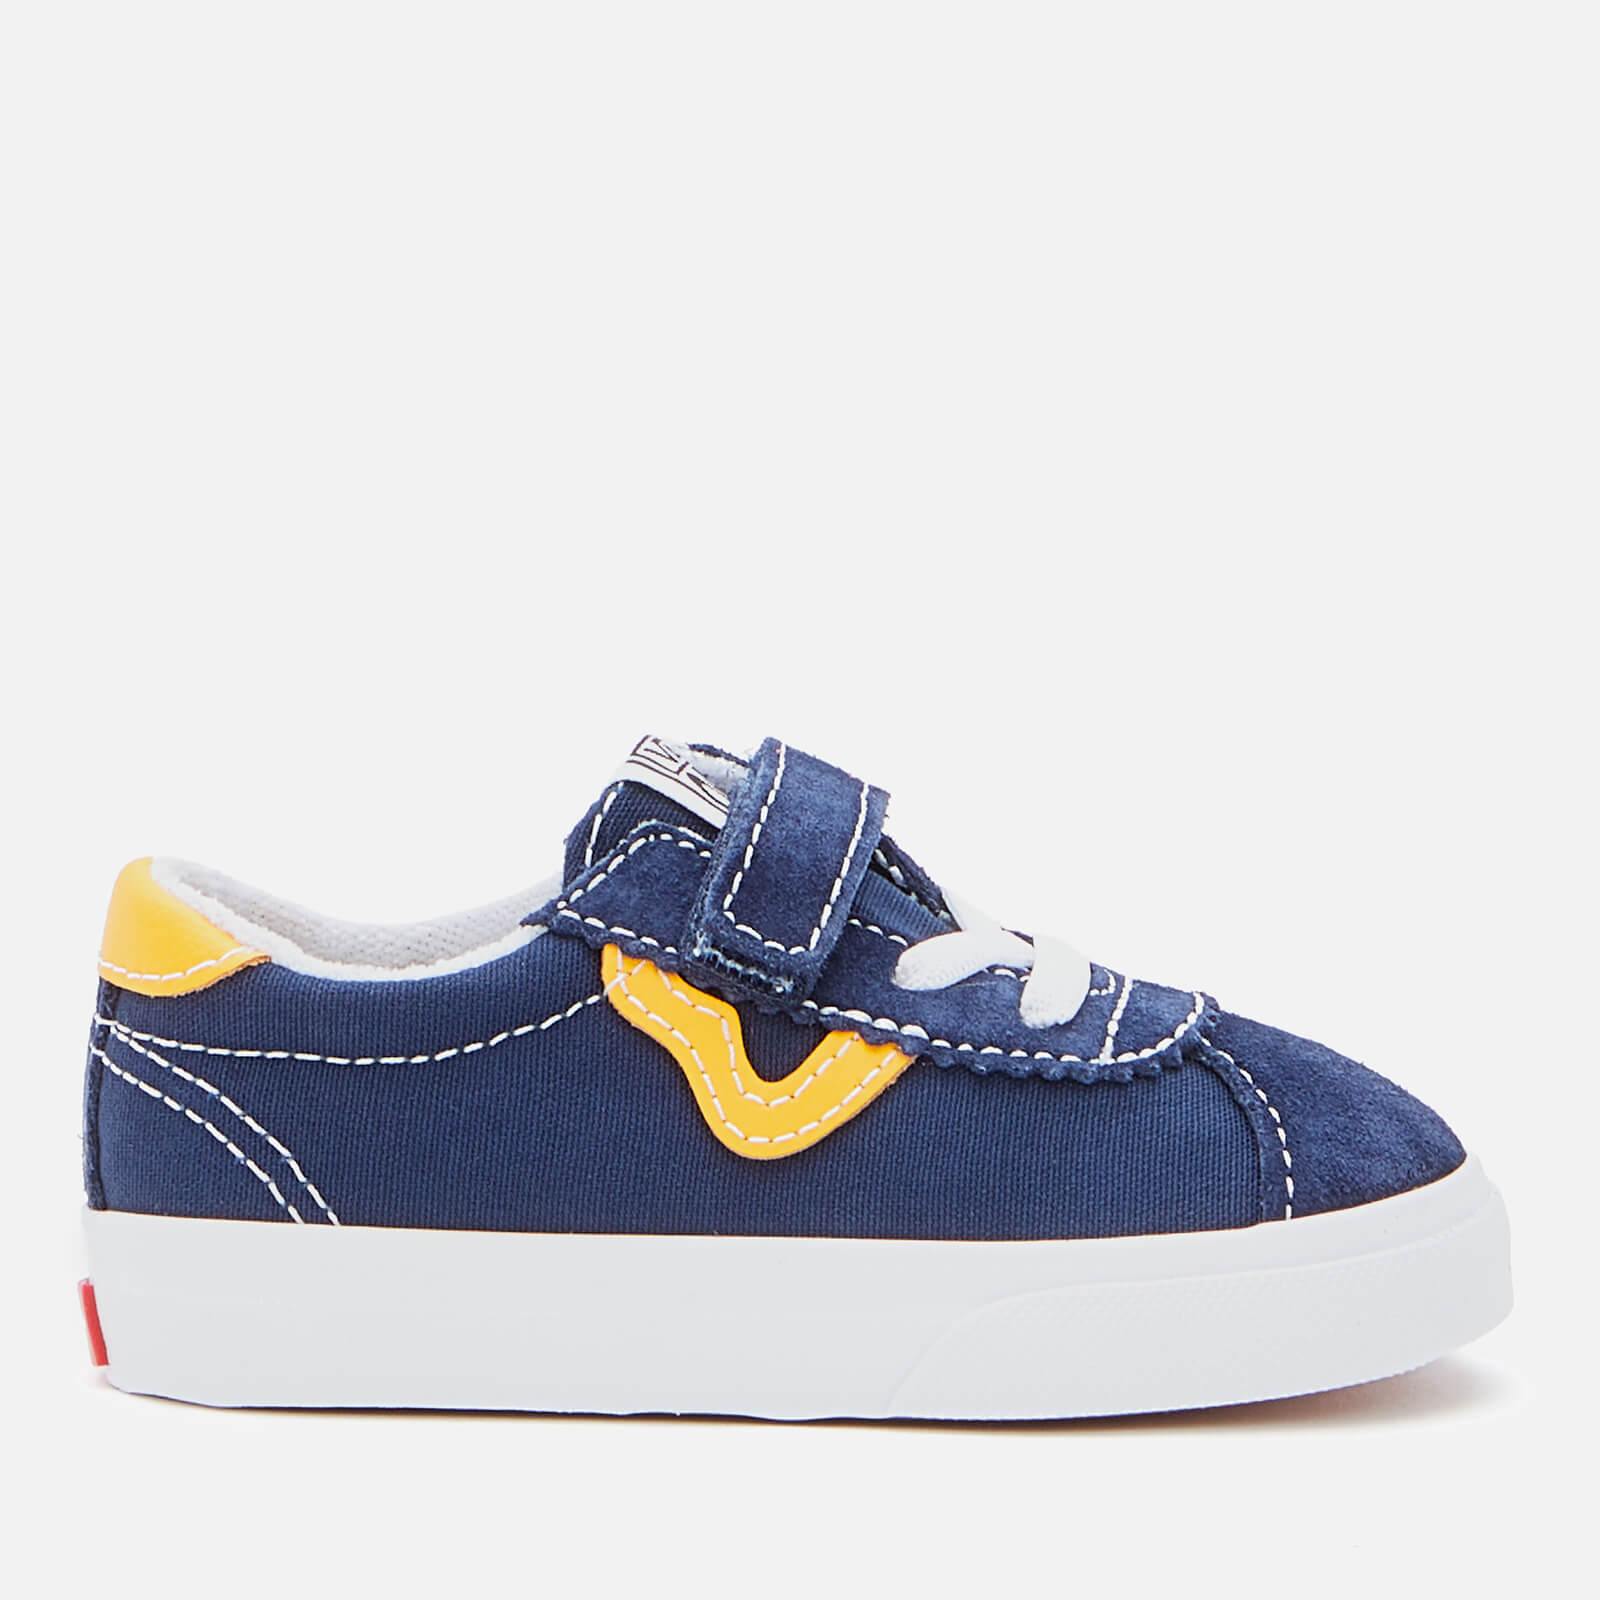 Vans Toddlers' Classic Sport Veclro Trainers - Dress Blue - UK 3 Baby